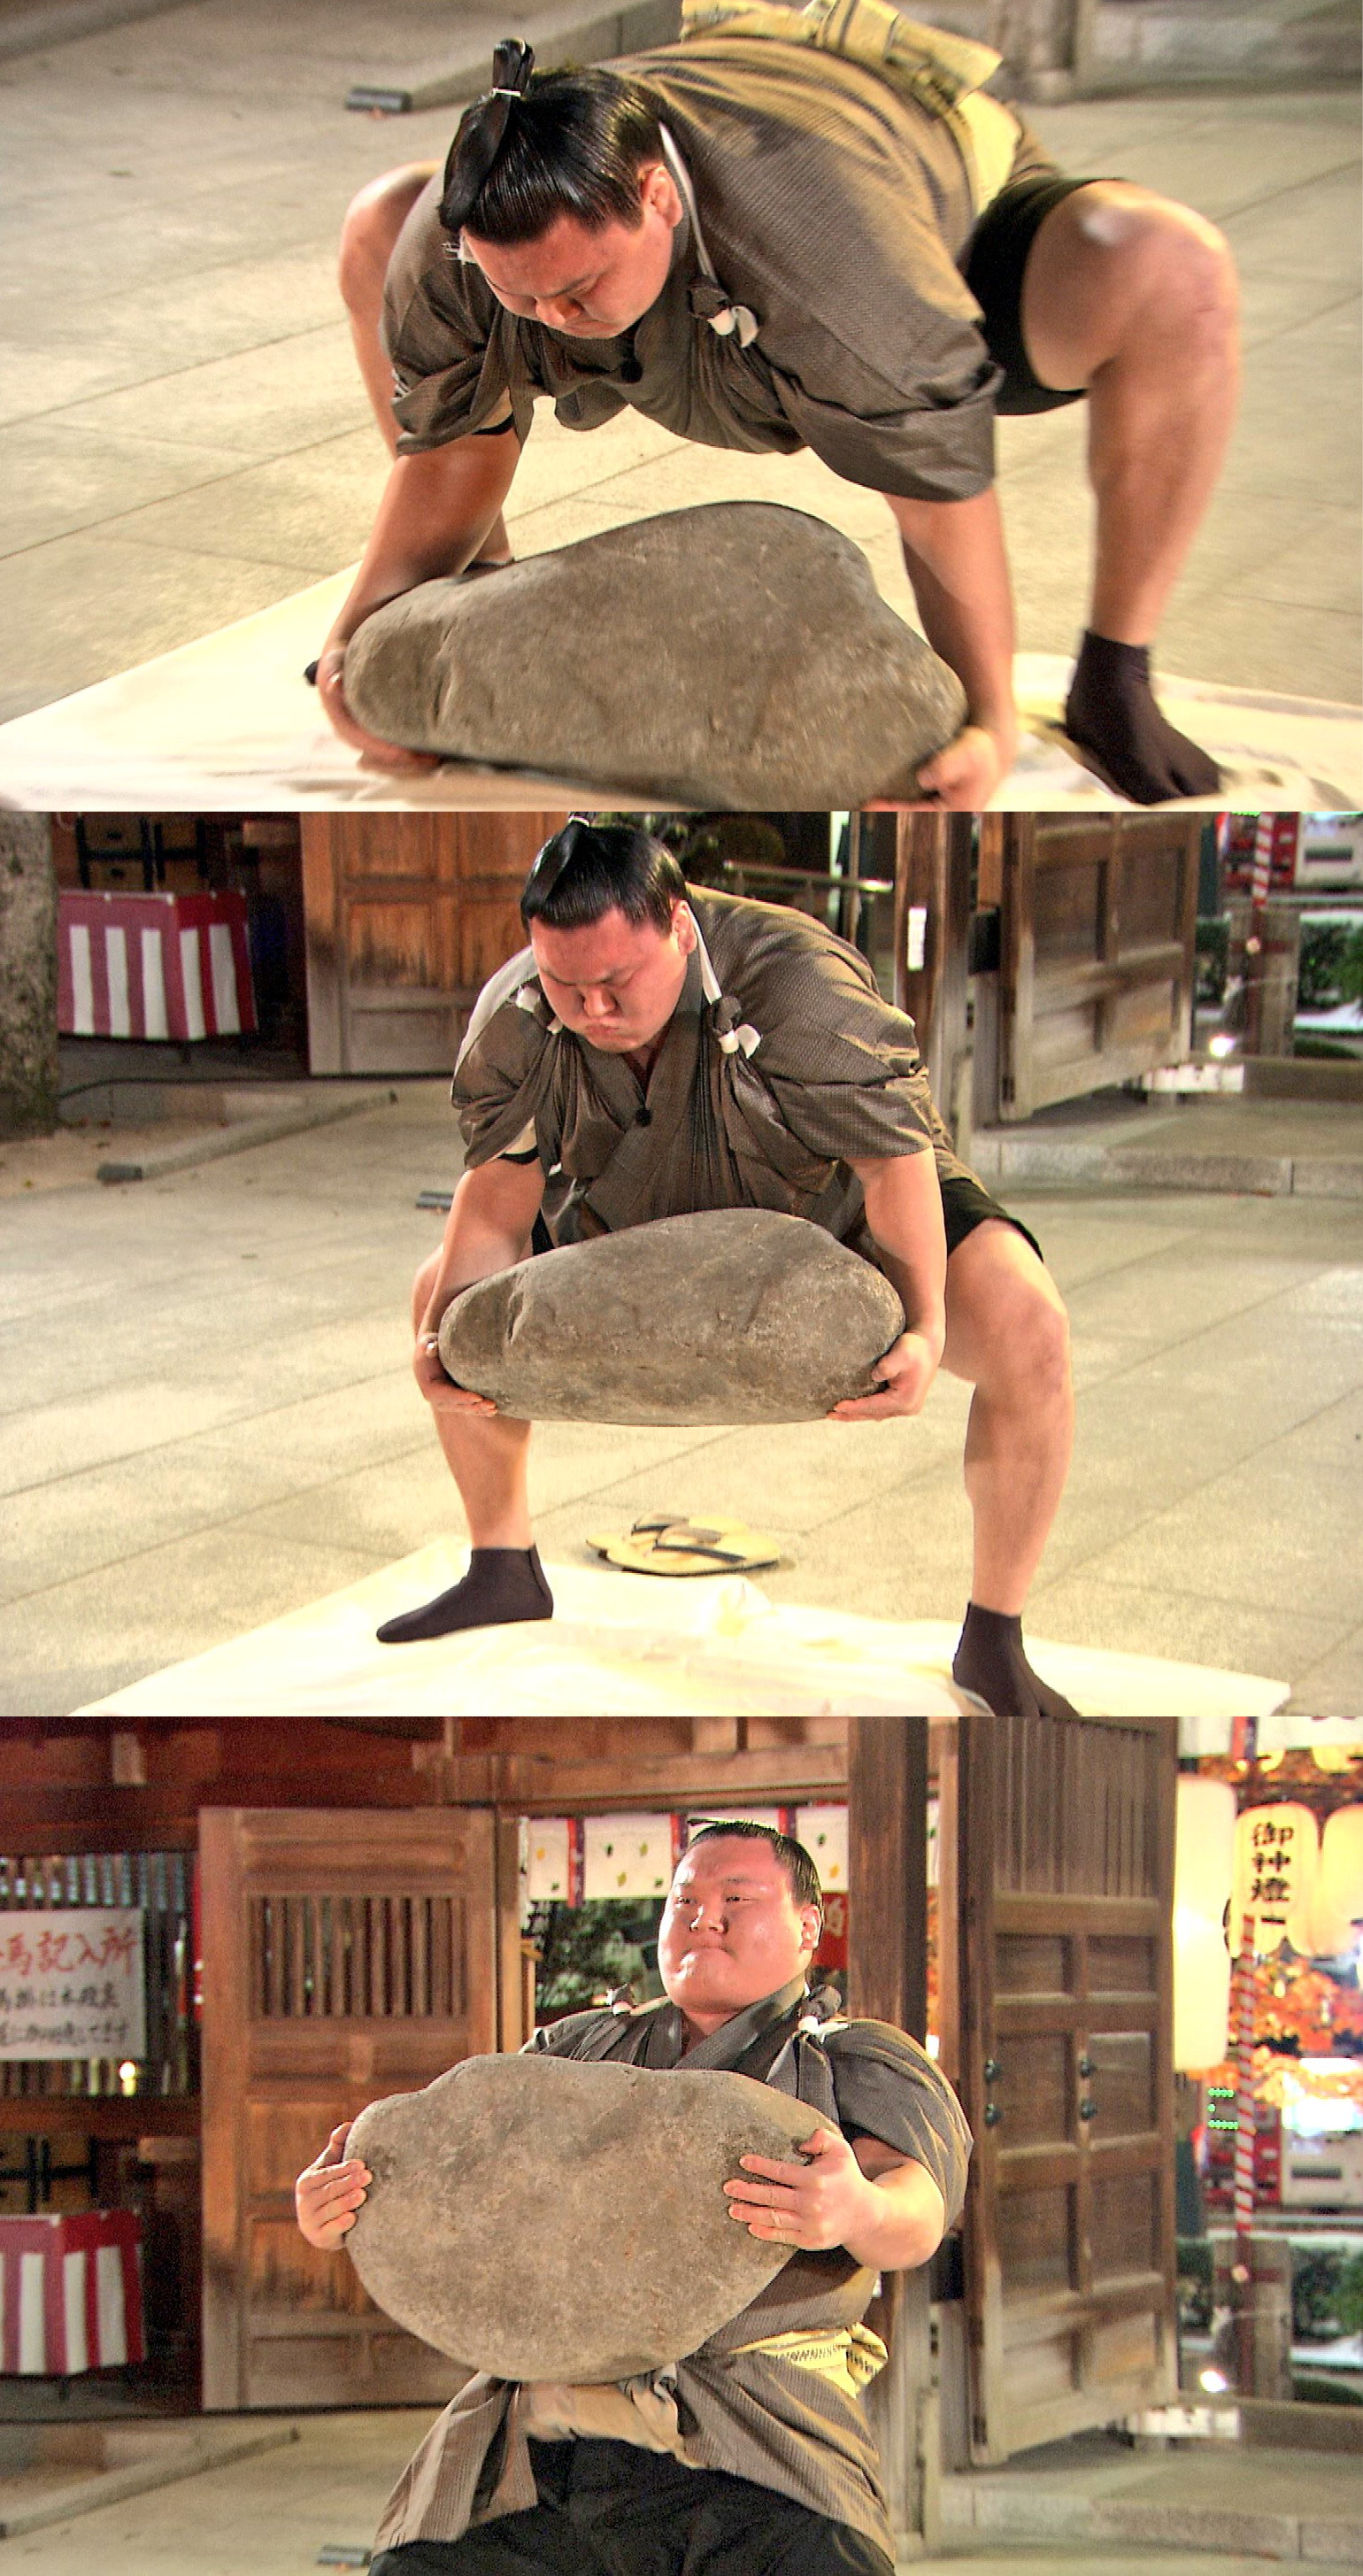 A stitch of three photos of Hakuhō dedicating his power stone. In the first image, Hakuhō grips the stone on the ground. In the second, Hakuhō has lifted the stone to his knees. In the third, Hakuhō is standing straight with the stone on his chest.